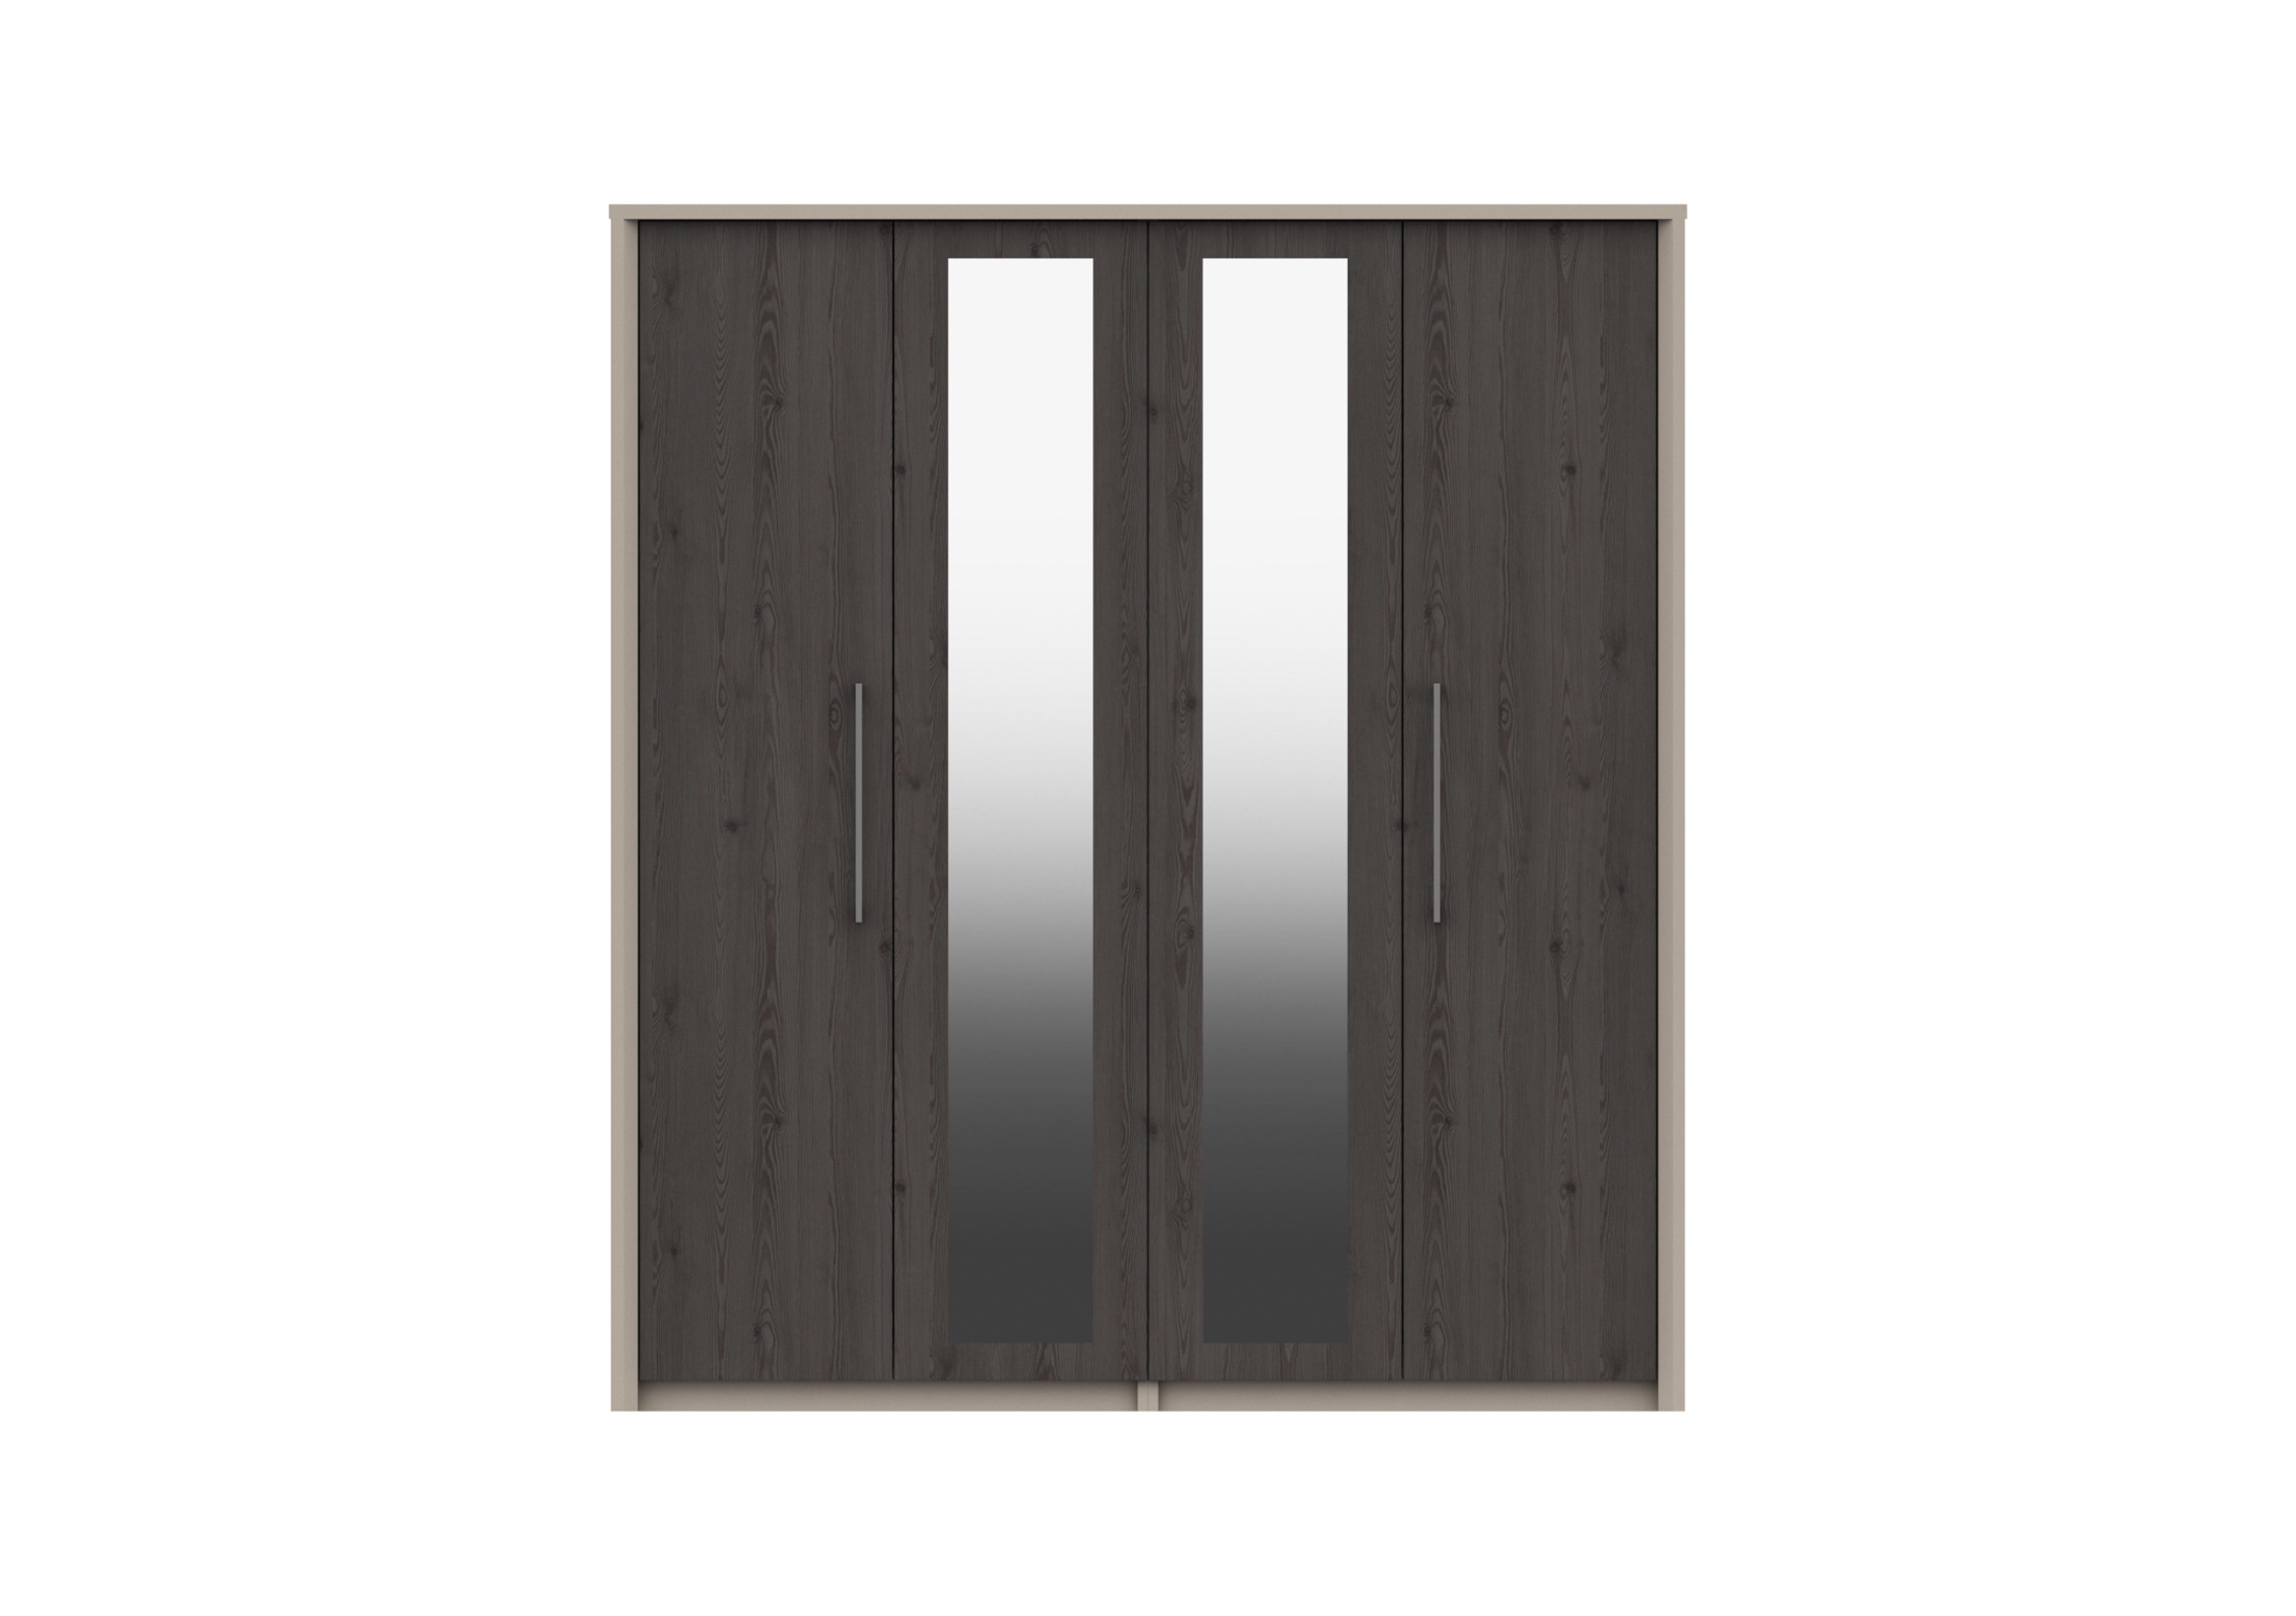 Paddington 4 Door Wardrobe with Mirrors in Fired Earth/Anthracite Larch on Furniture Village